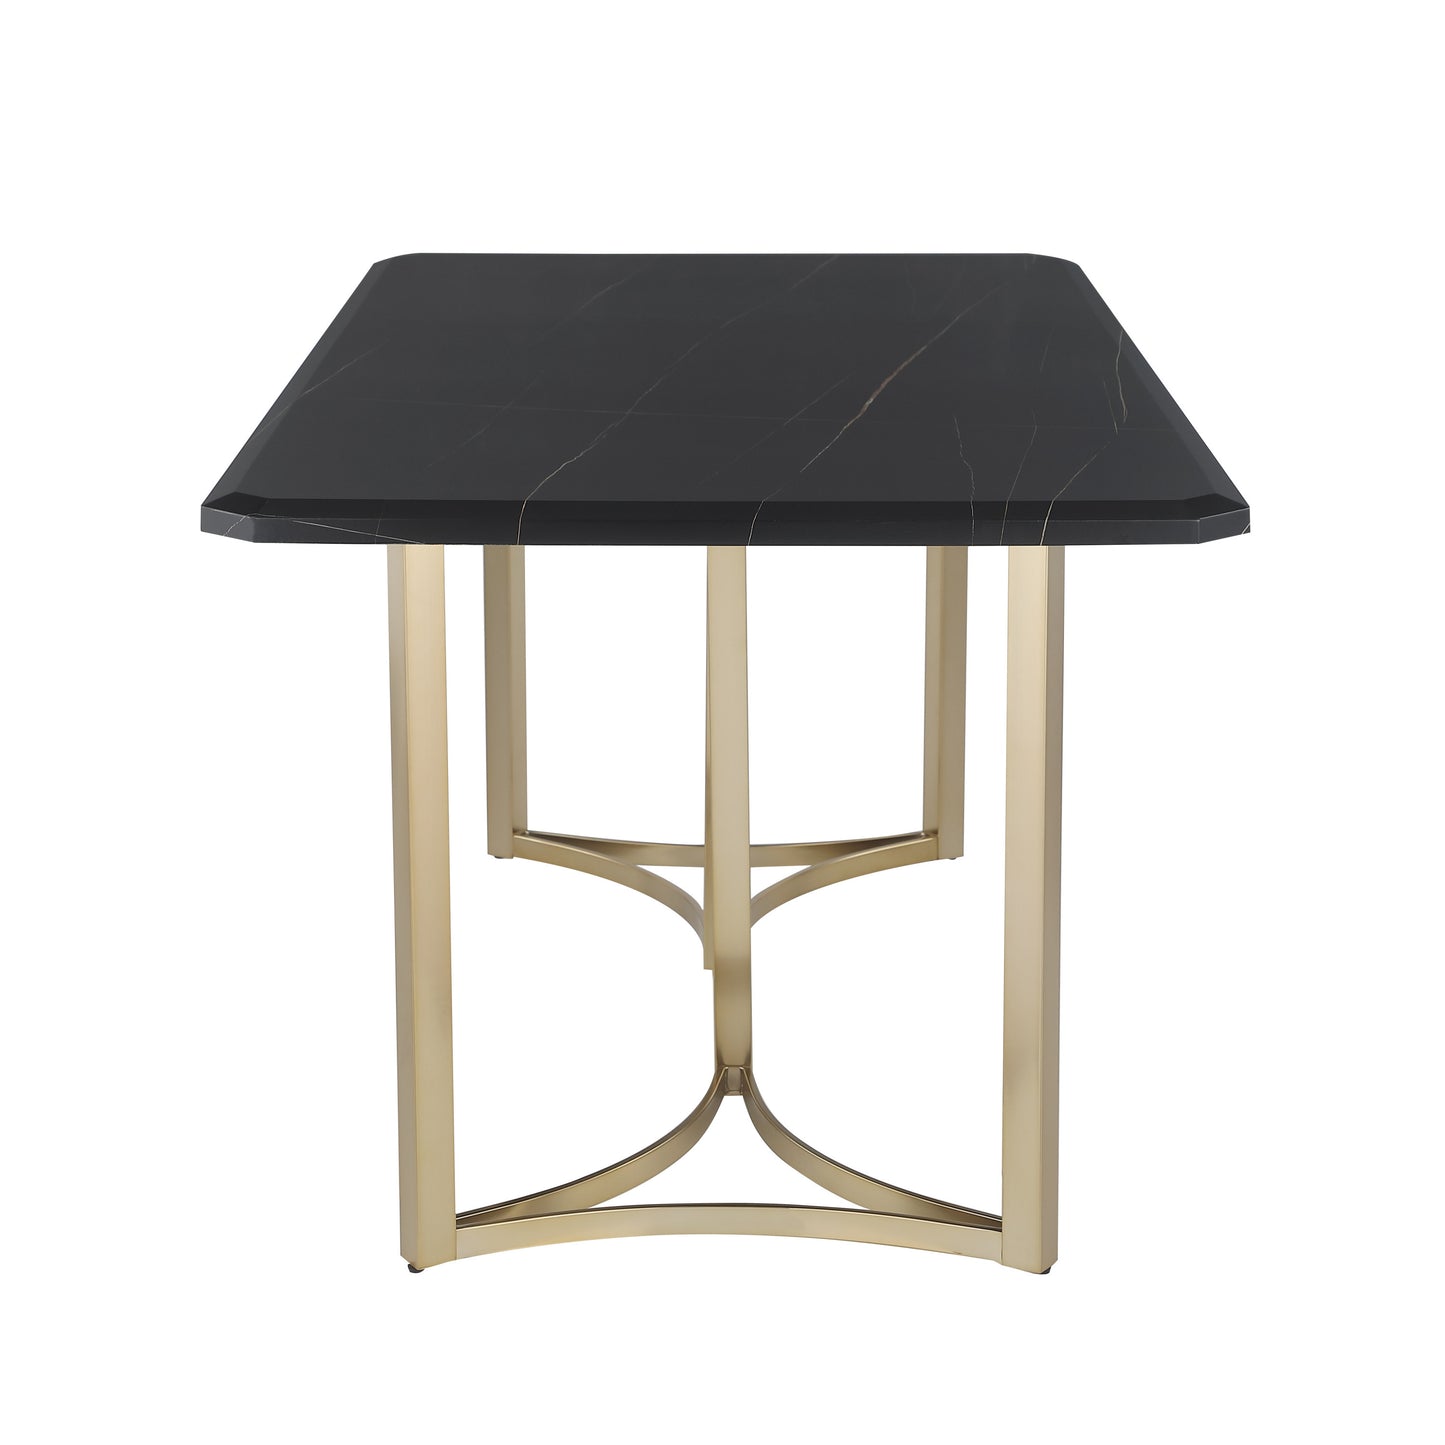 71"x35.5"x30" Contemporary Lauren Gold Black Top Dining Table with Durable Brushed Brass Metal Base,Kitchen Table for 6-8 Person for Living Room, Dining Room,Home and Office